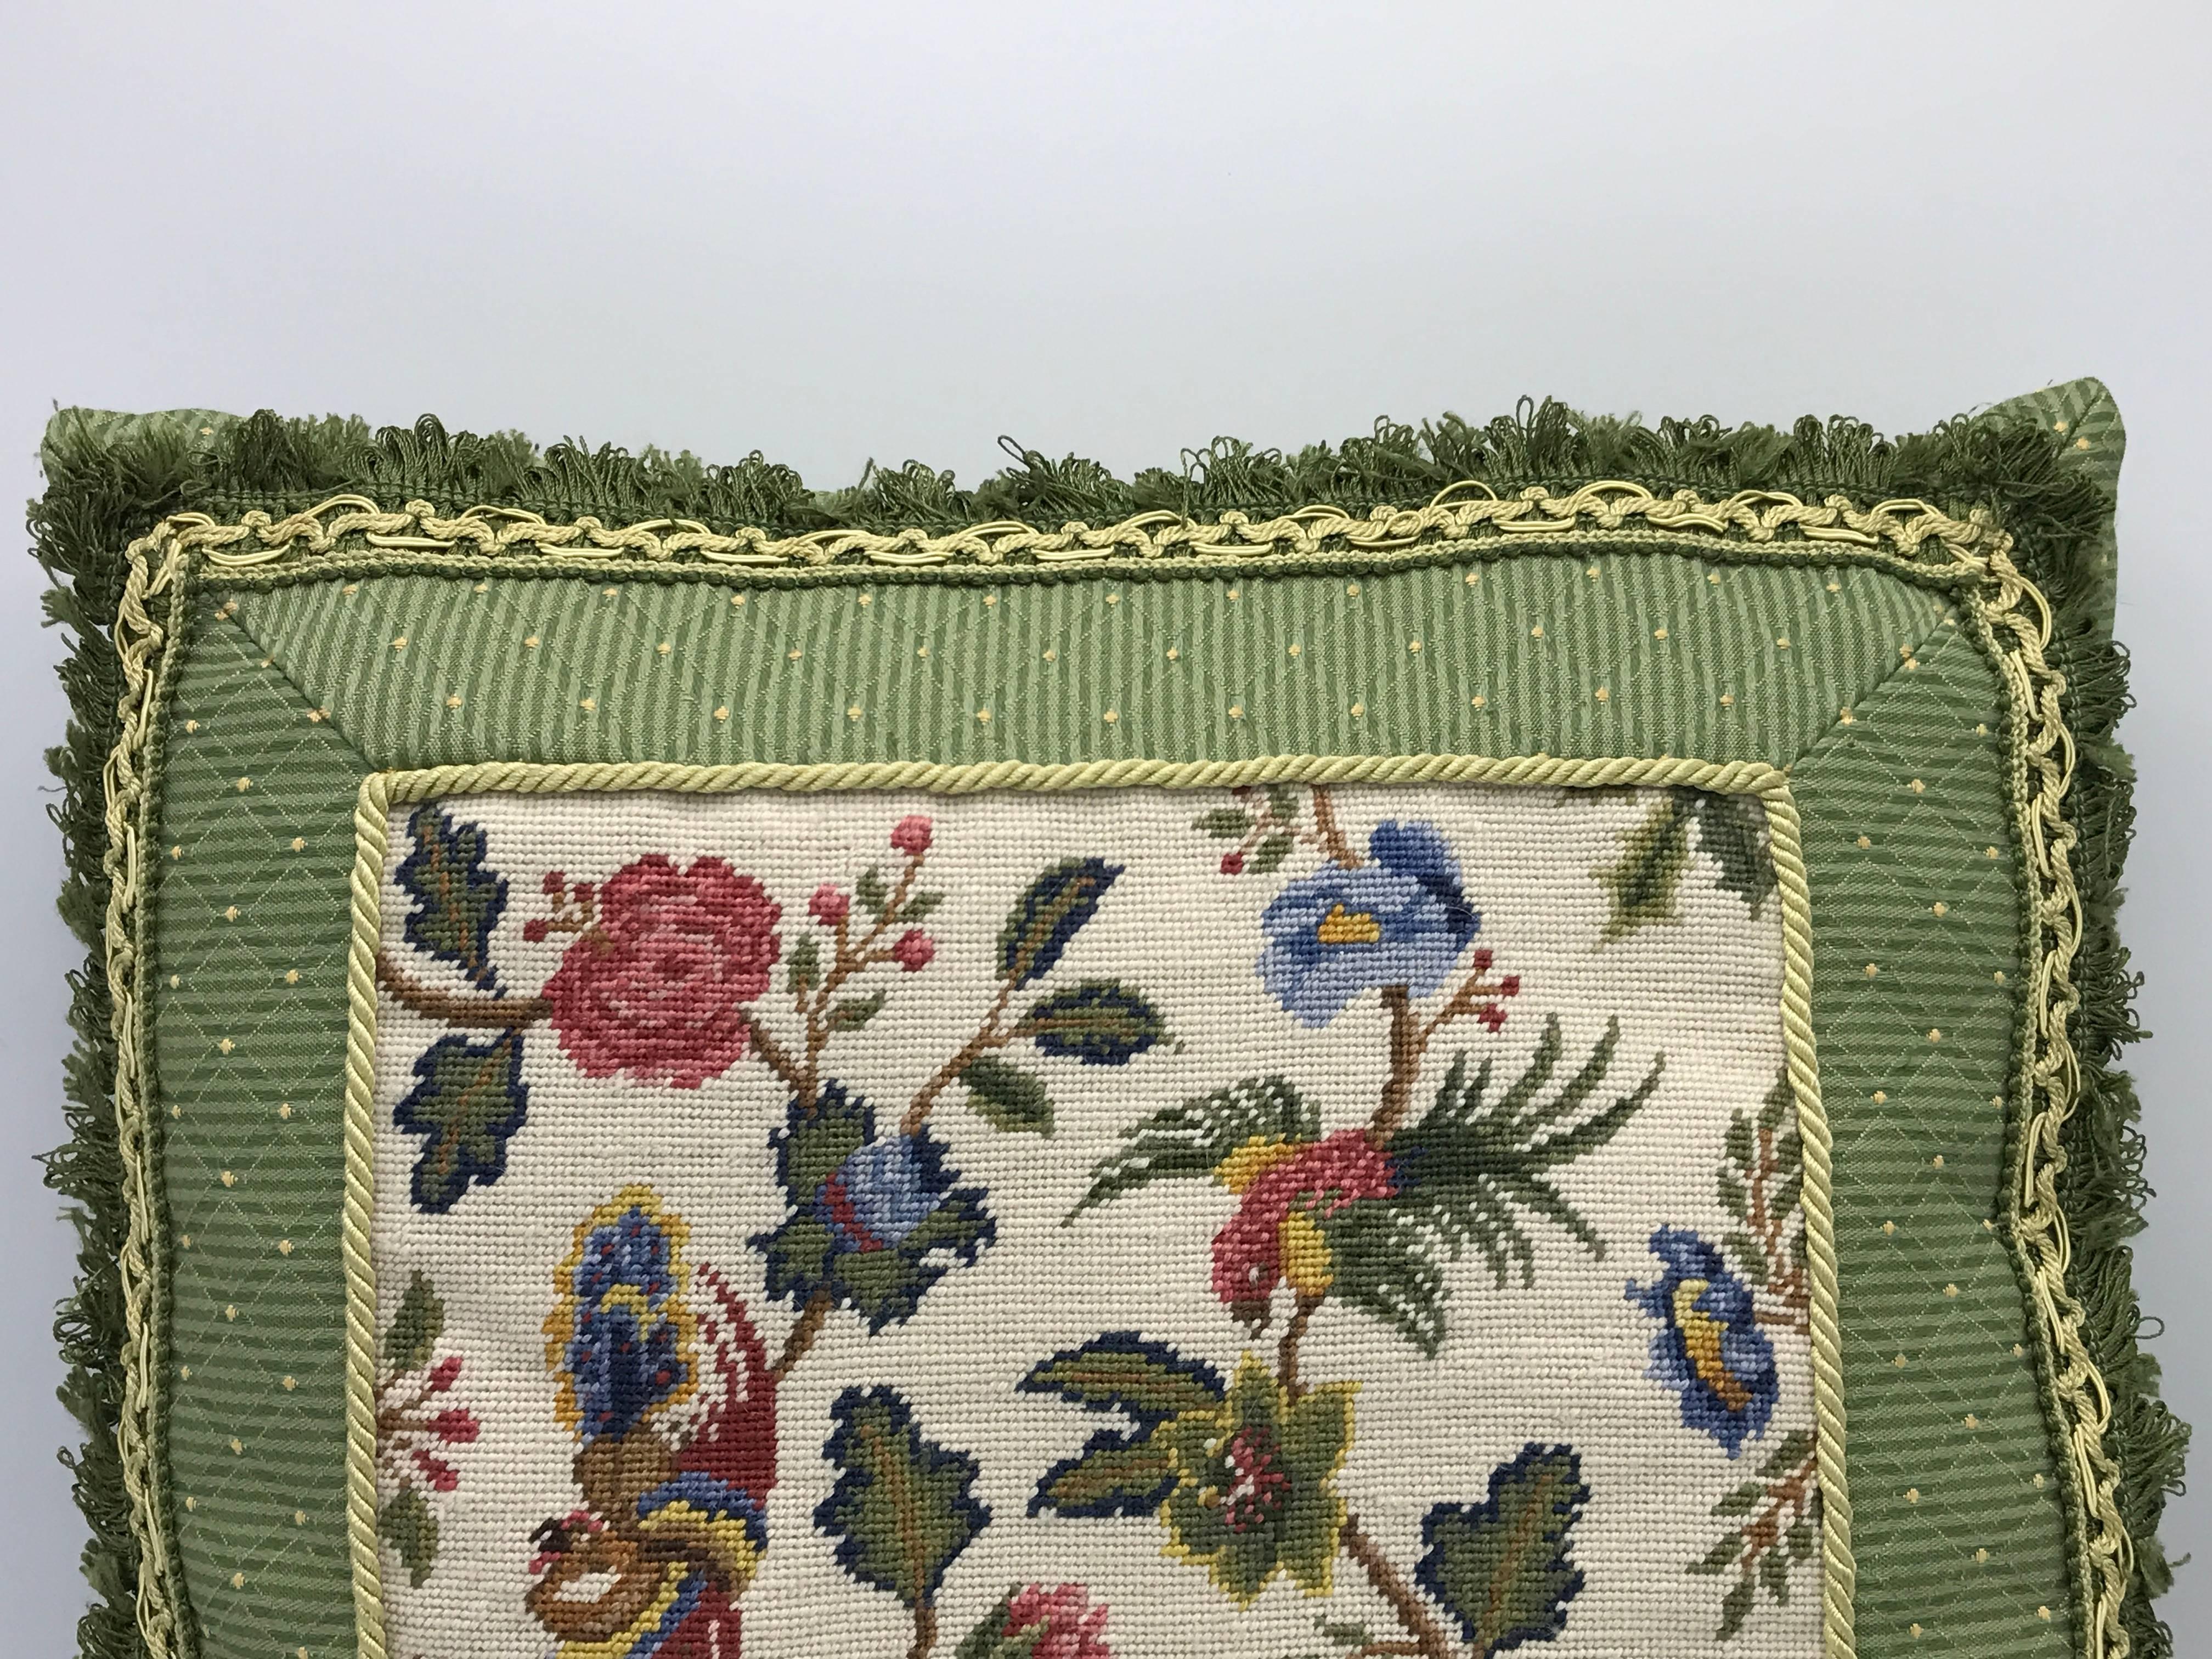 Offered is a beautiful, 1960s floral motif needlepoint pillow. The floral motif is complimented by a green band and backing.